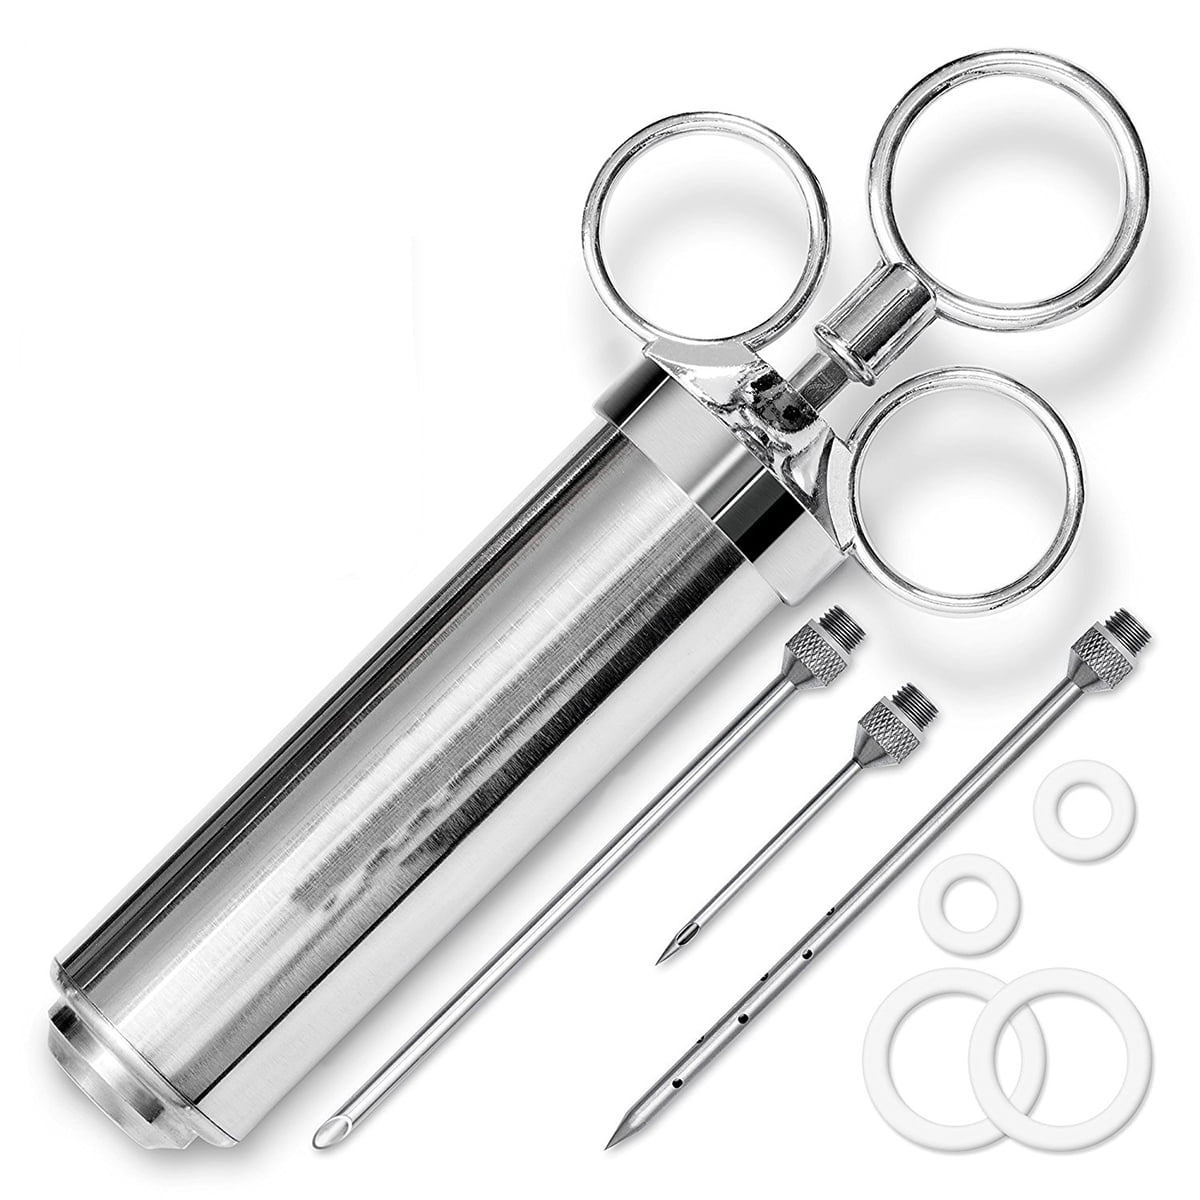 Meat Turkey Injector,Stainless Steel Marinade injector Syringe 304 Stainless 